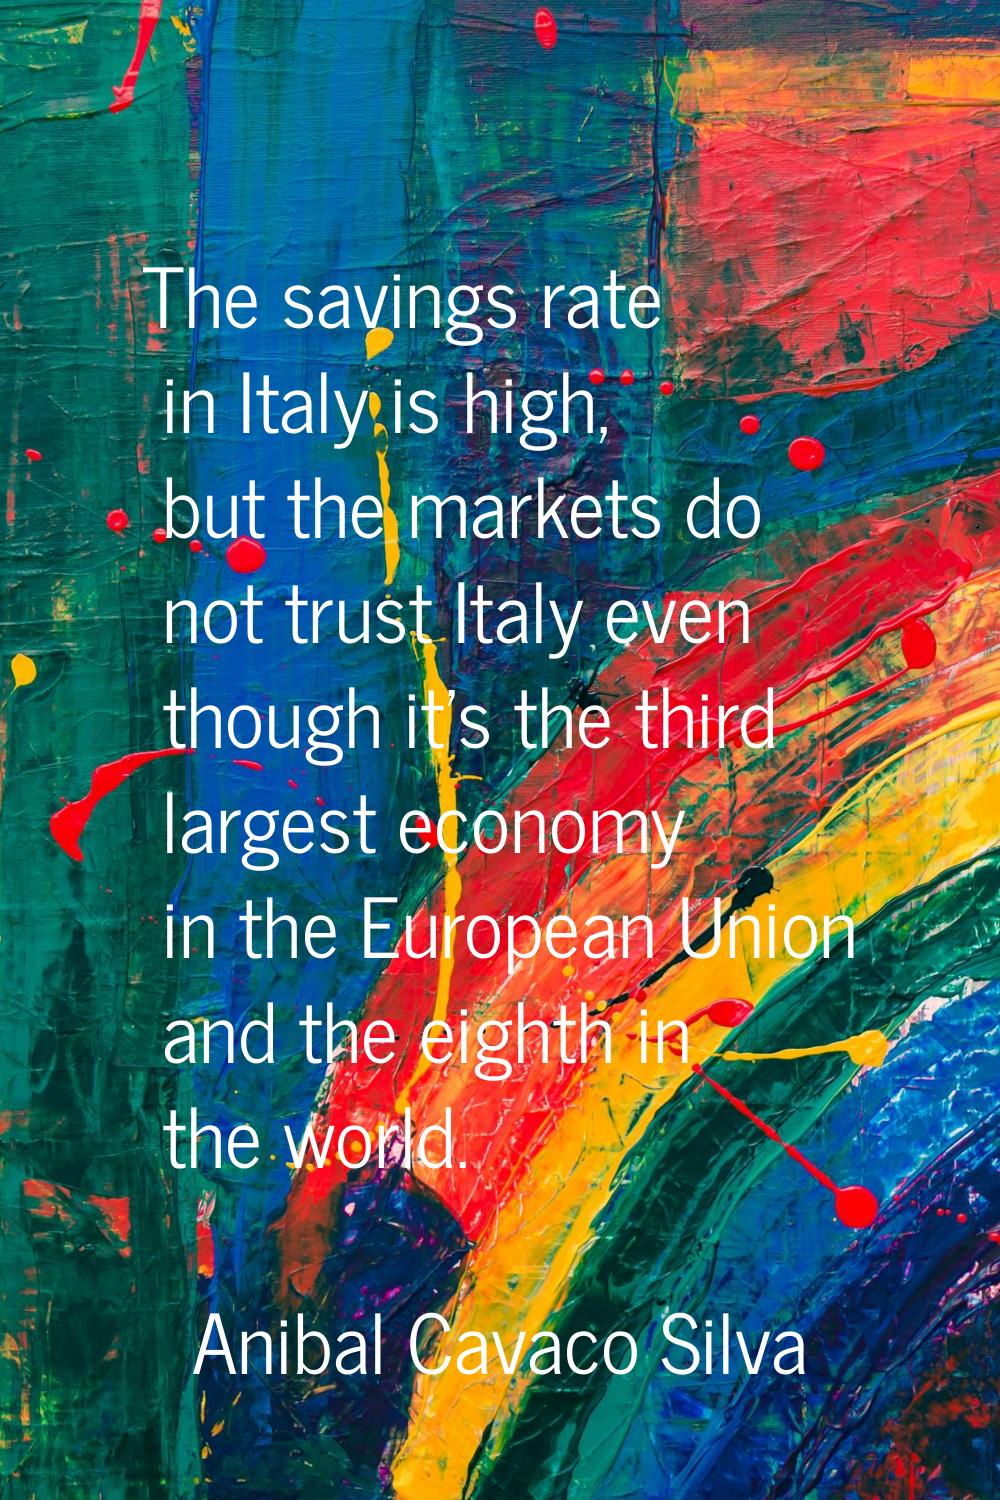 The savings rate in Italy is high, but the markets do not trust Italy even though it's the third la